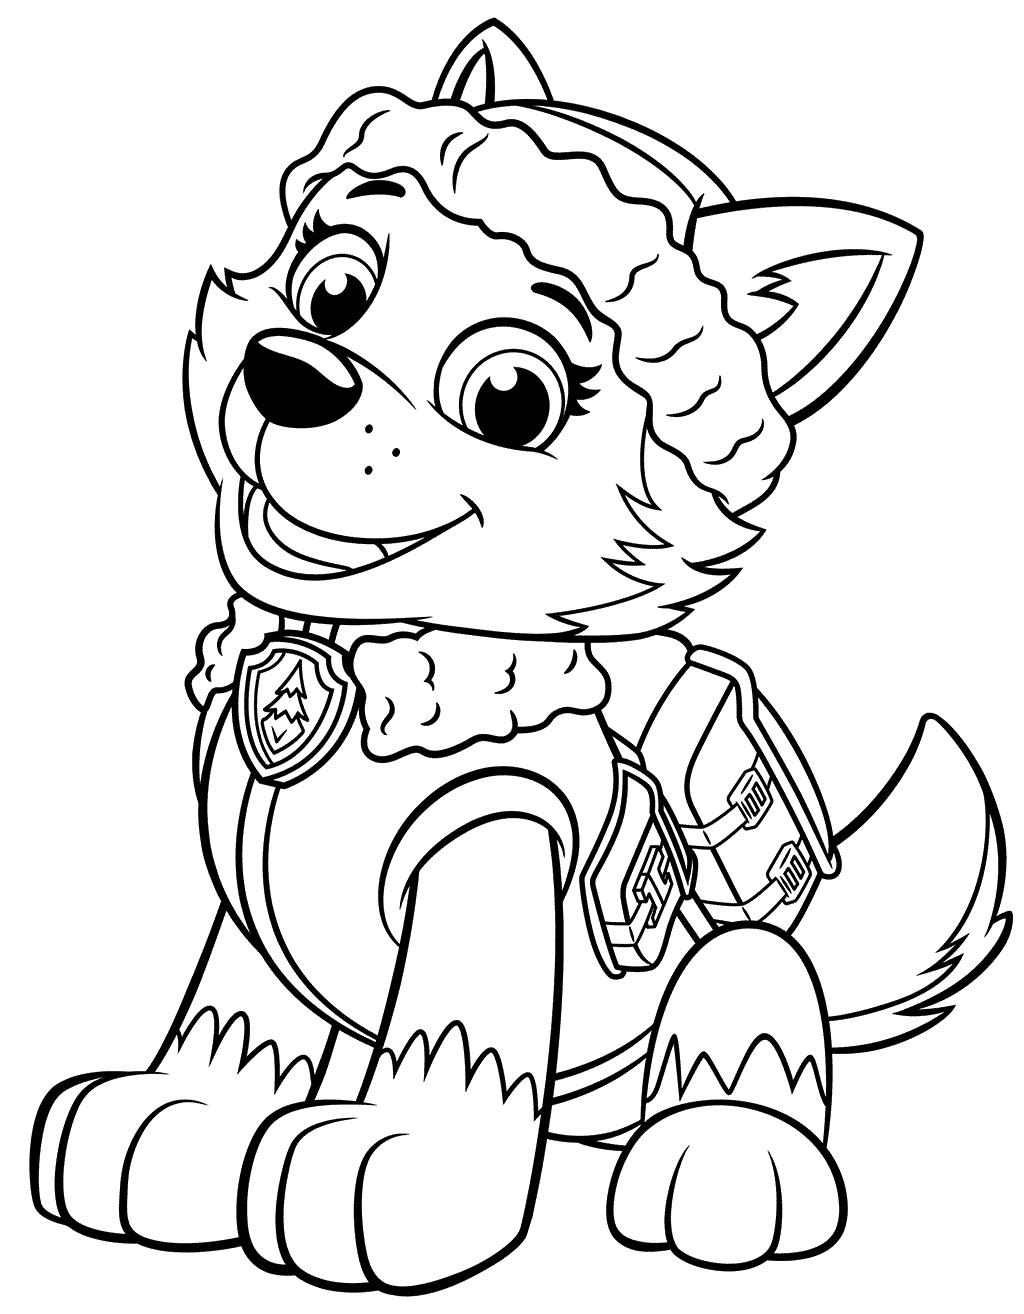 PAW Patrol Everest Coloring Page